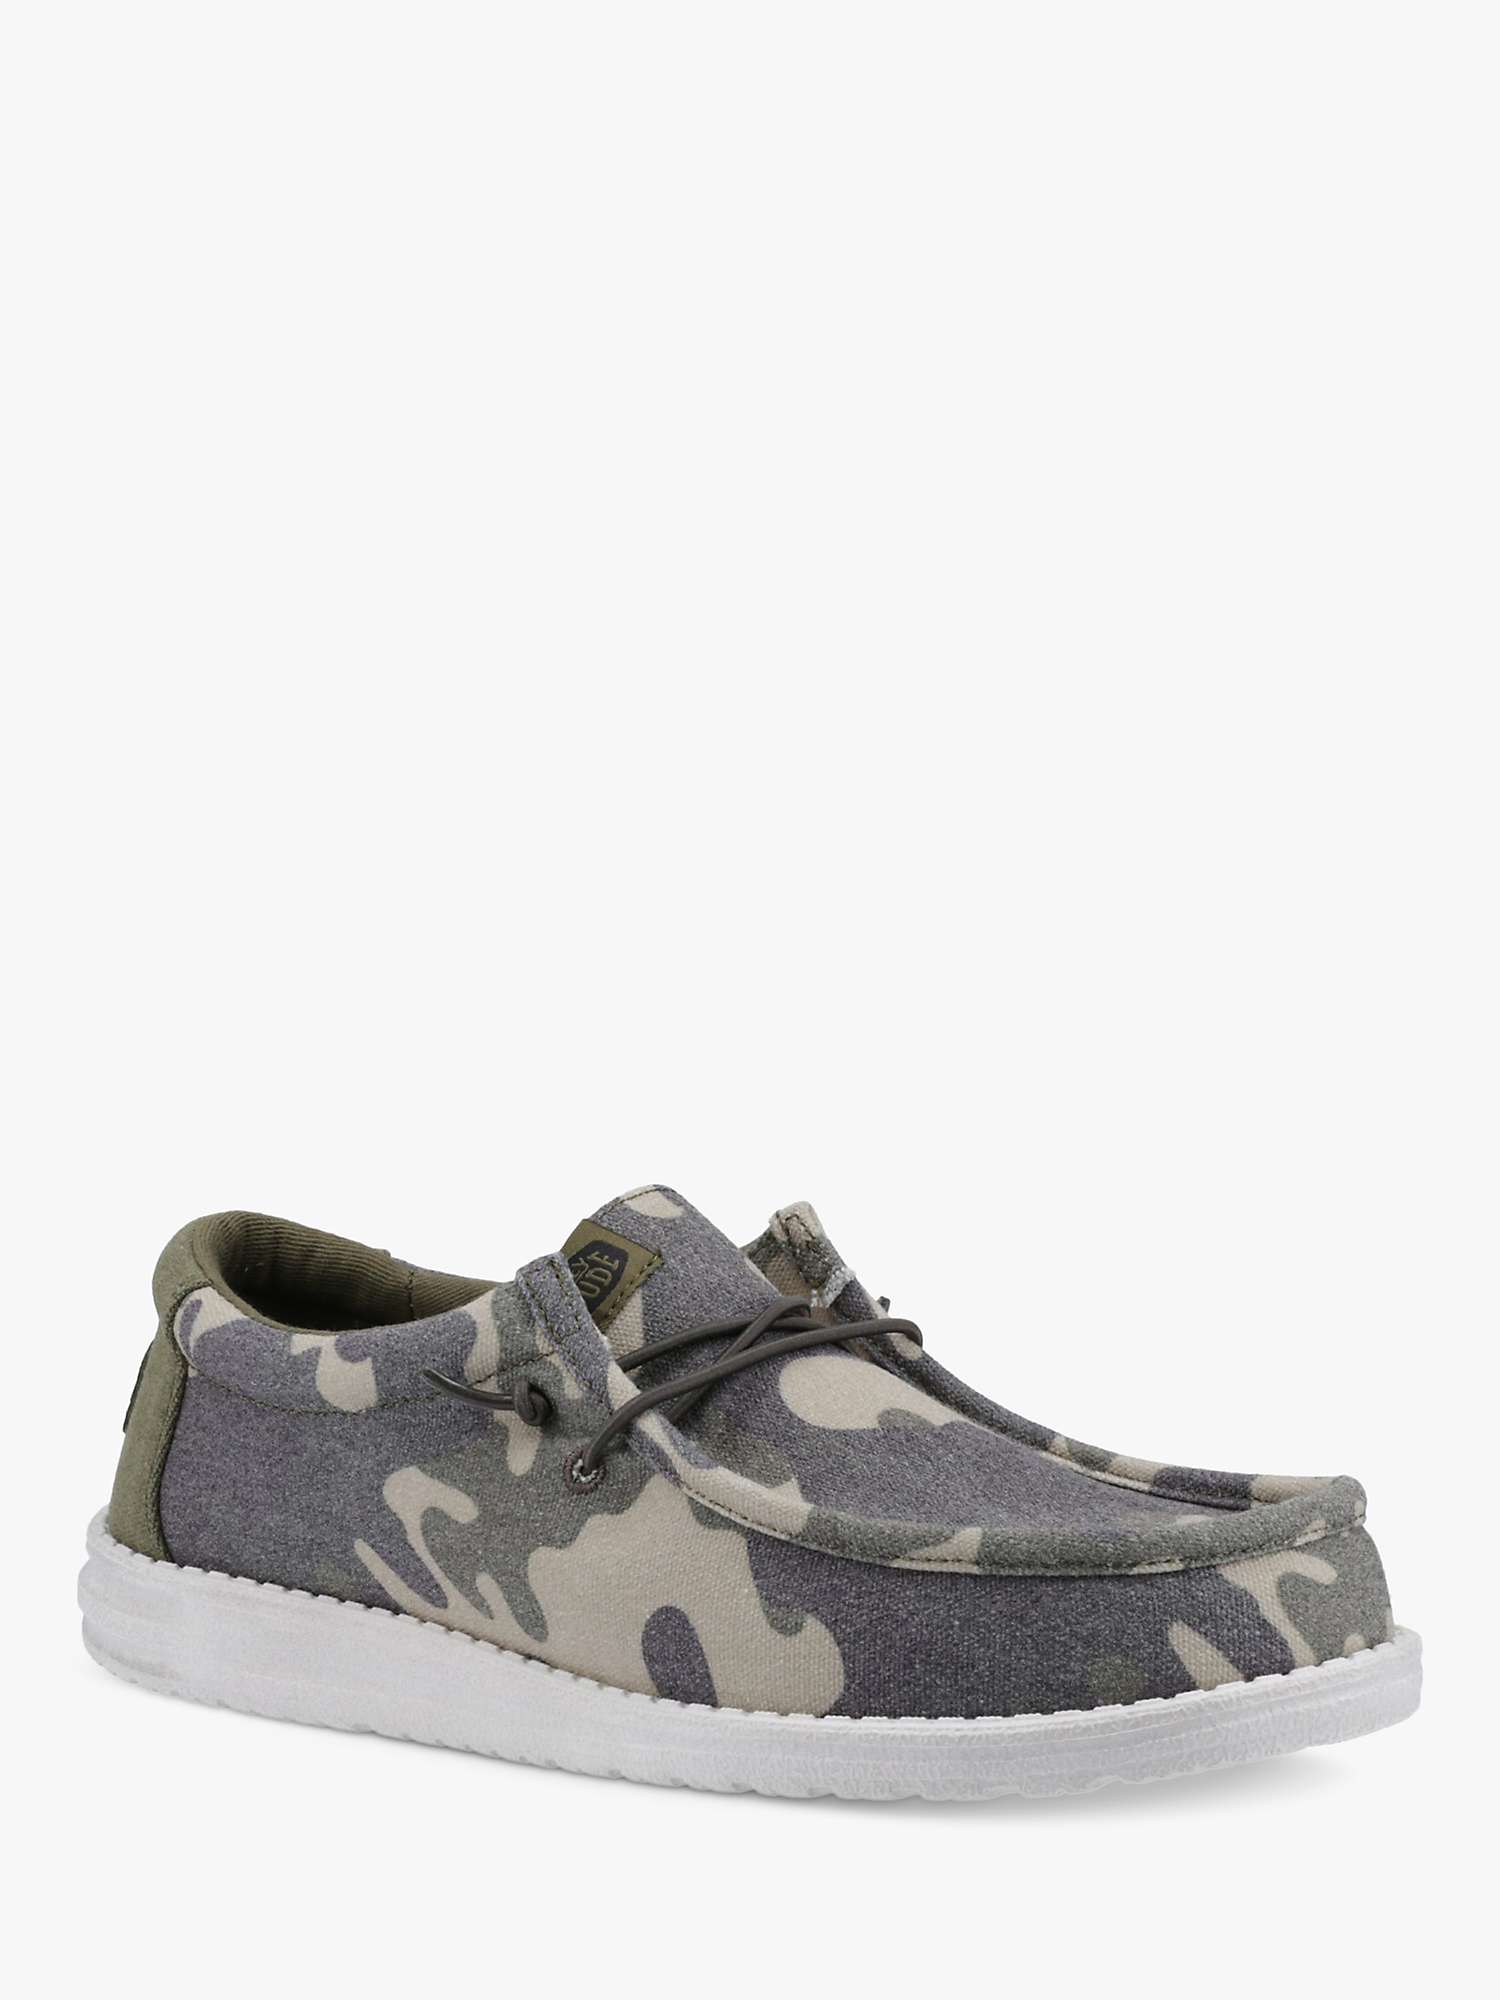 Buy Hey Dude Wally Washed Camo Shoes, Green/Multi Online at johnlewis.com